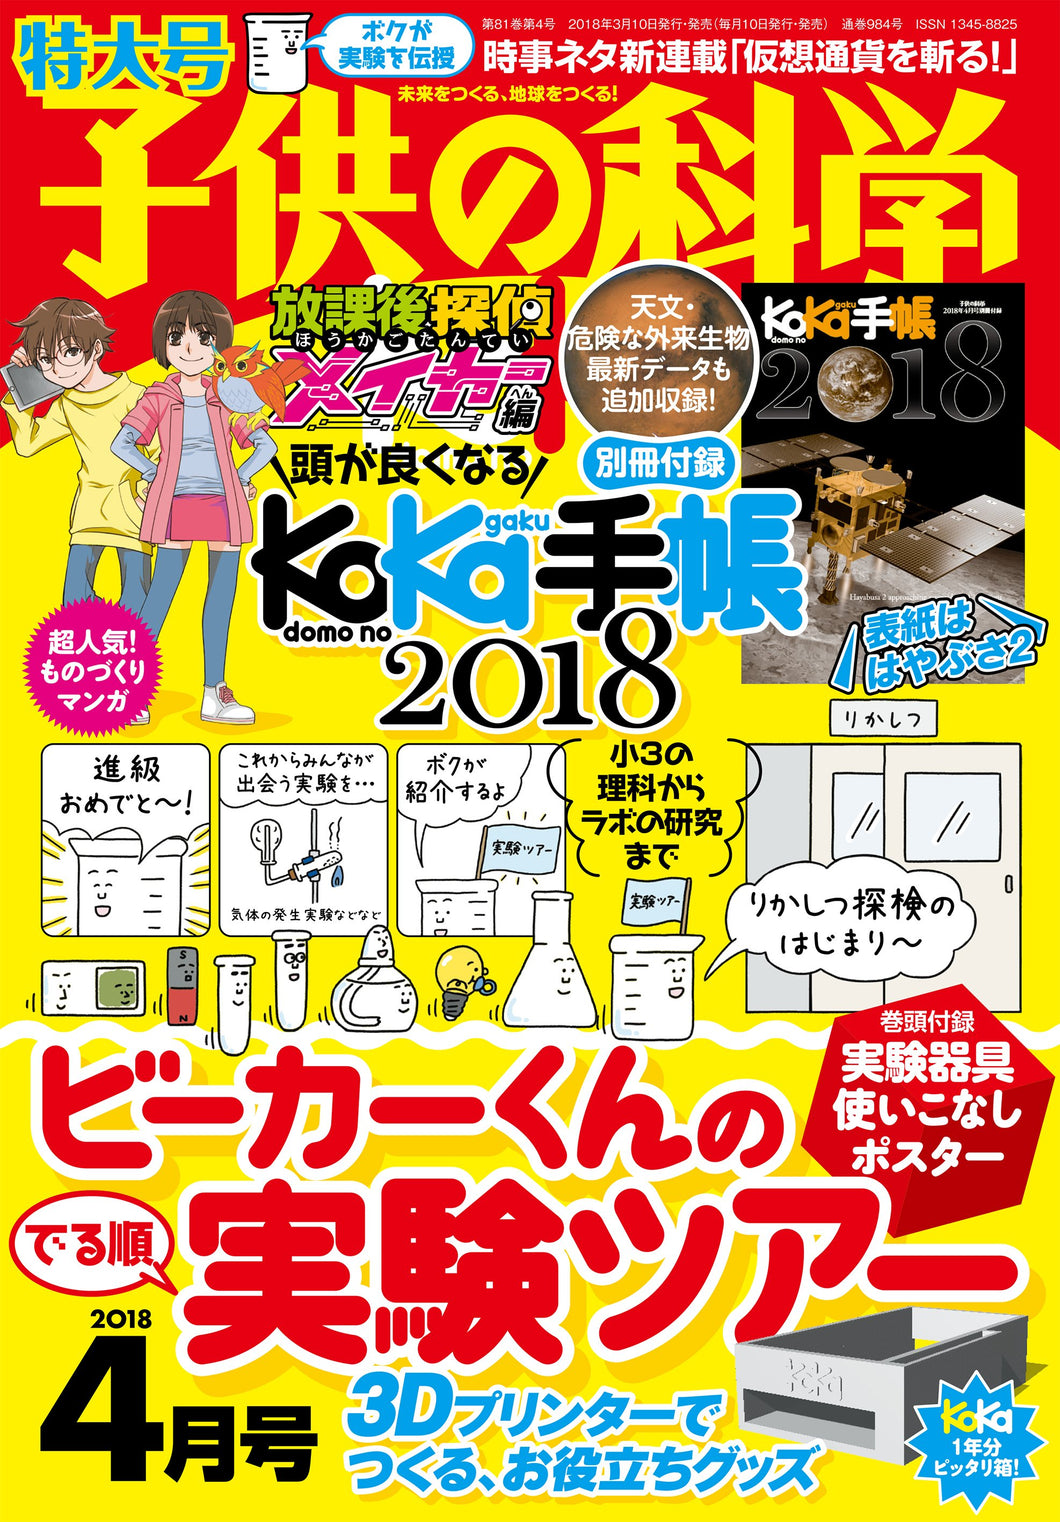 Kodomo no Kagaku April 2018 issue <extra-large issue> with appendix